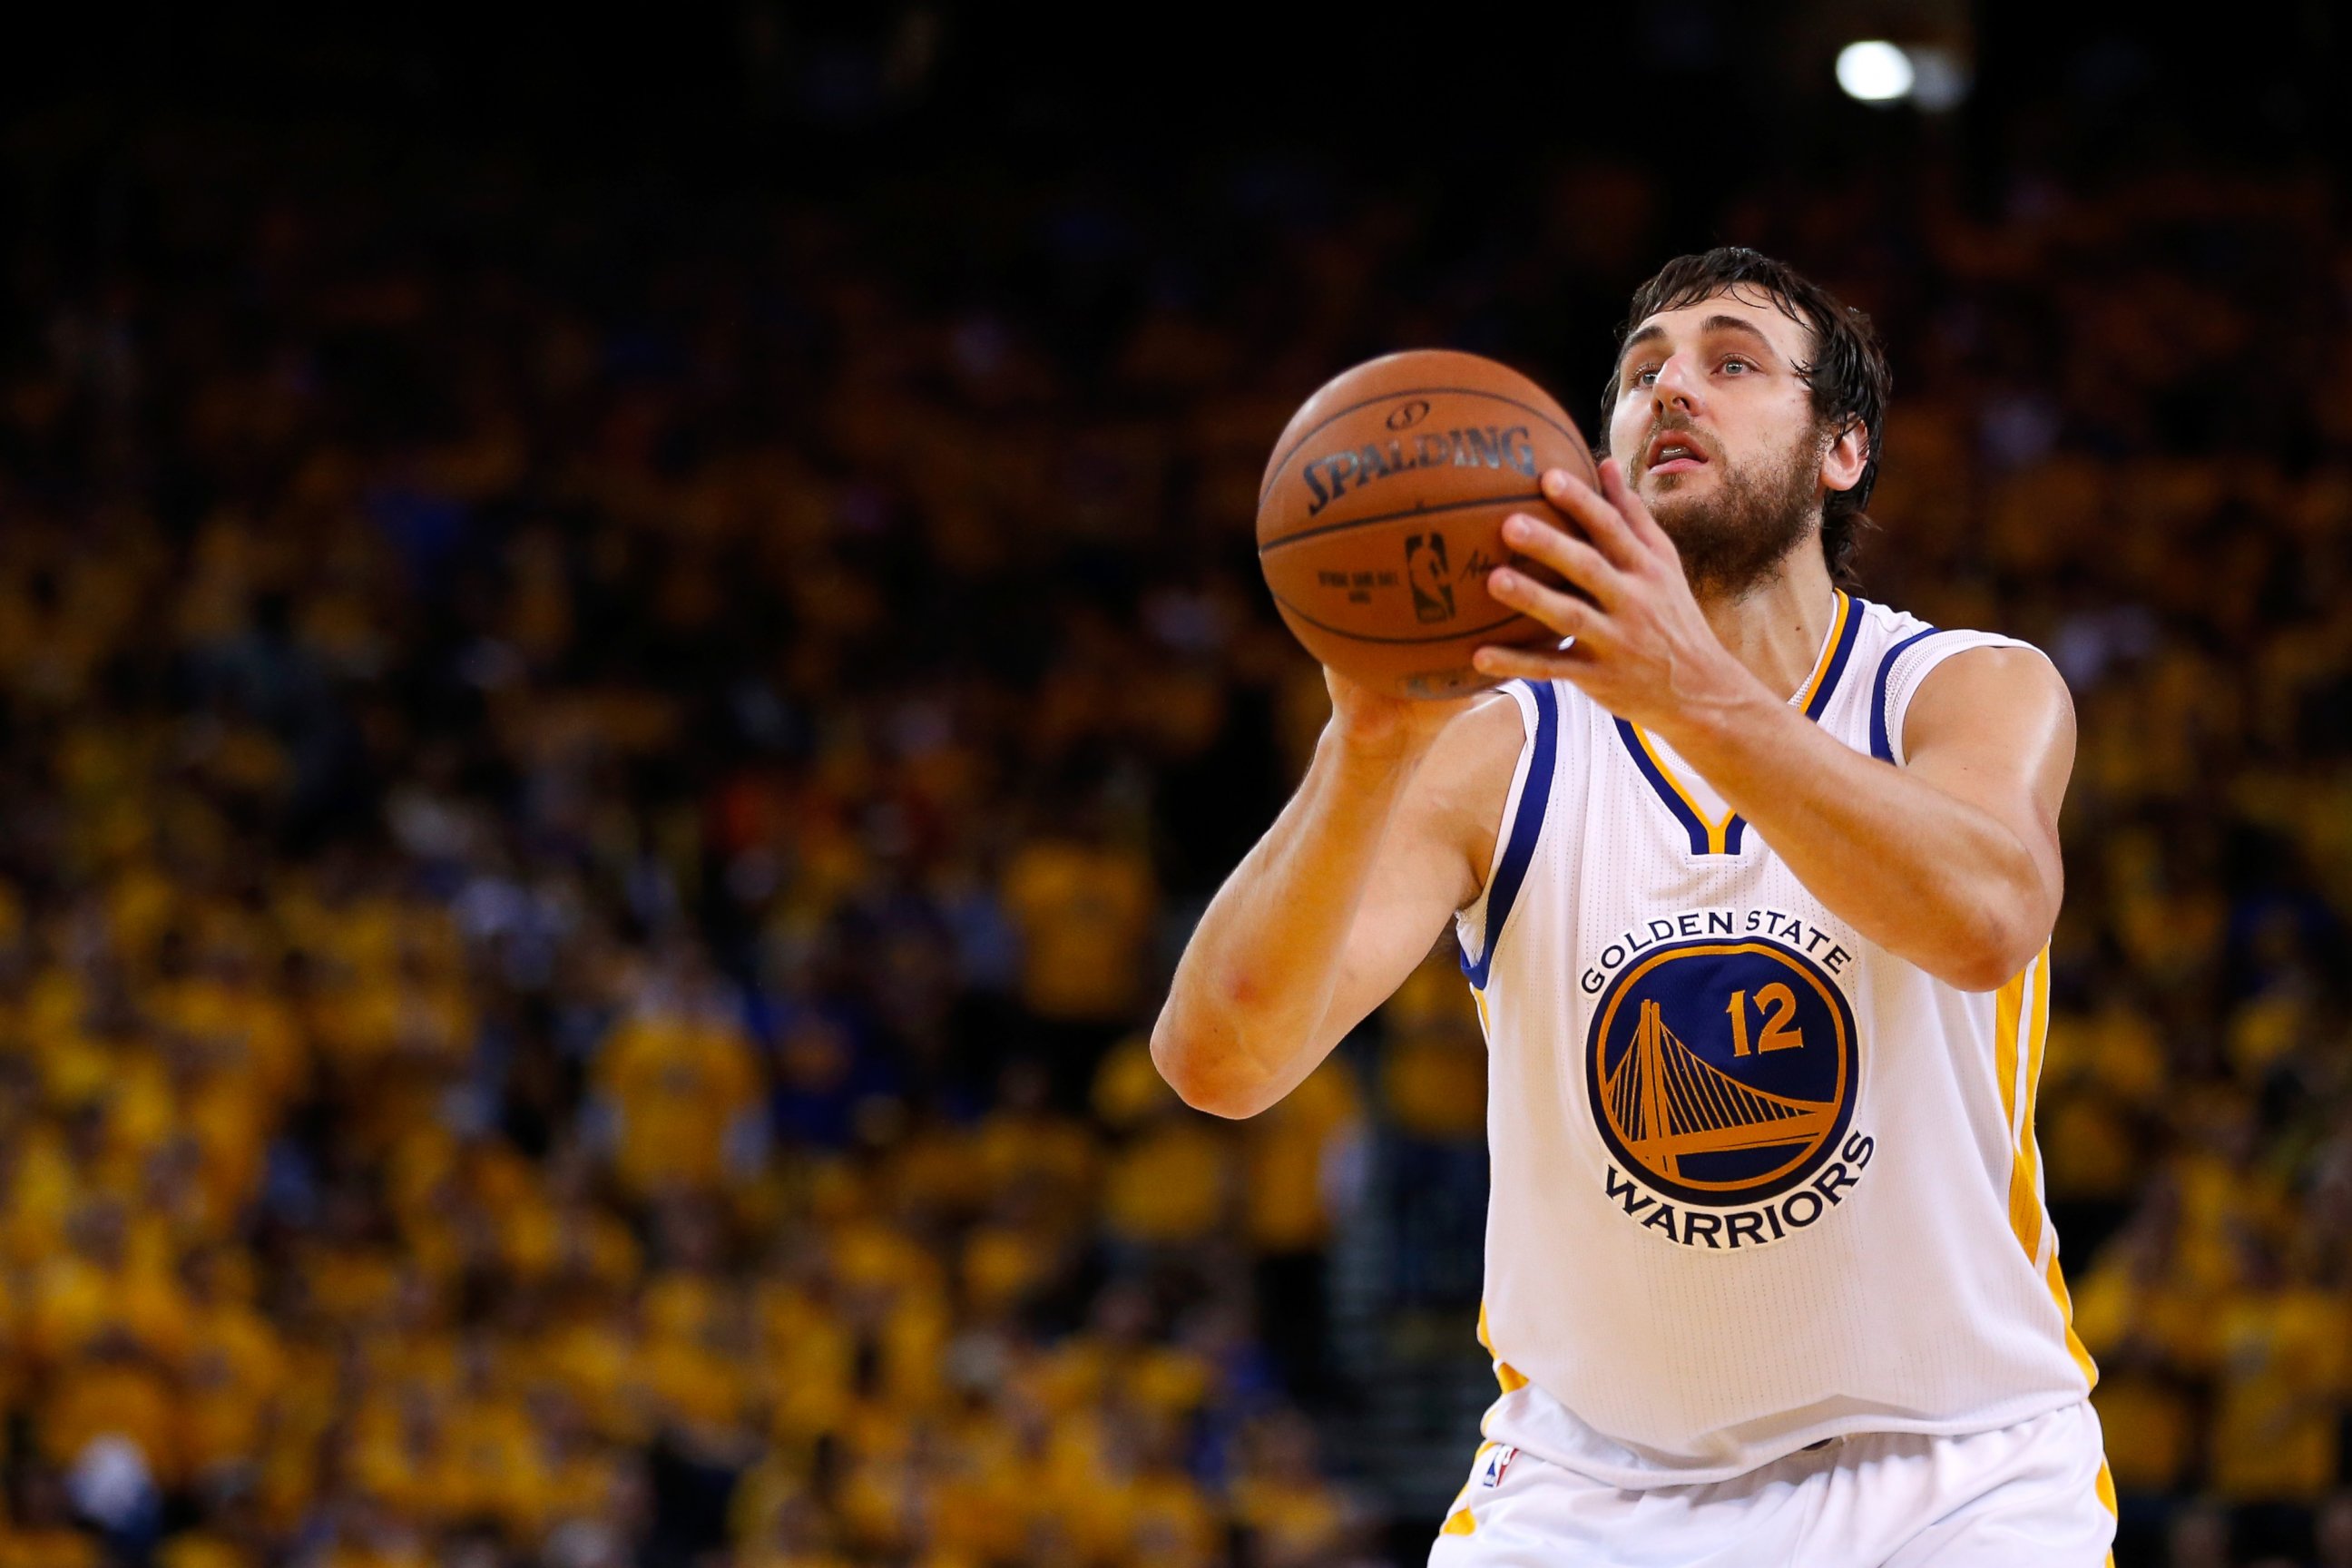 PHOTO: Andrew Bogut shoots a free throw in the second half against the Houston Rockets during game two of the Western Conference Finals of the 2015 NBA Playoffs, May 21, 2015 in Oakland, Calif.